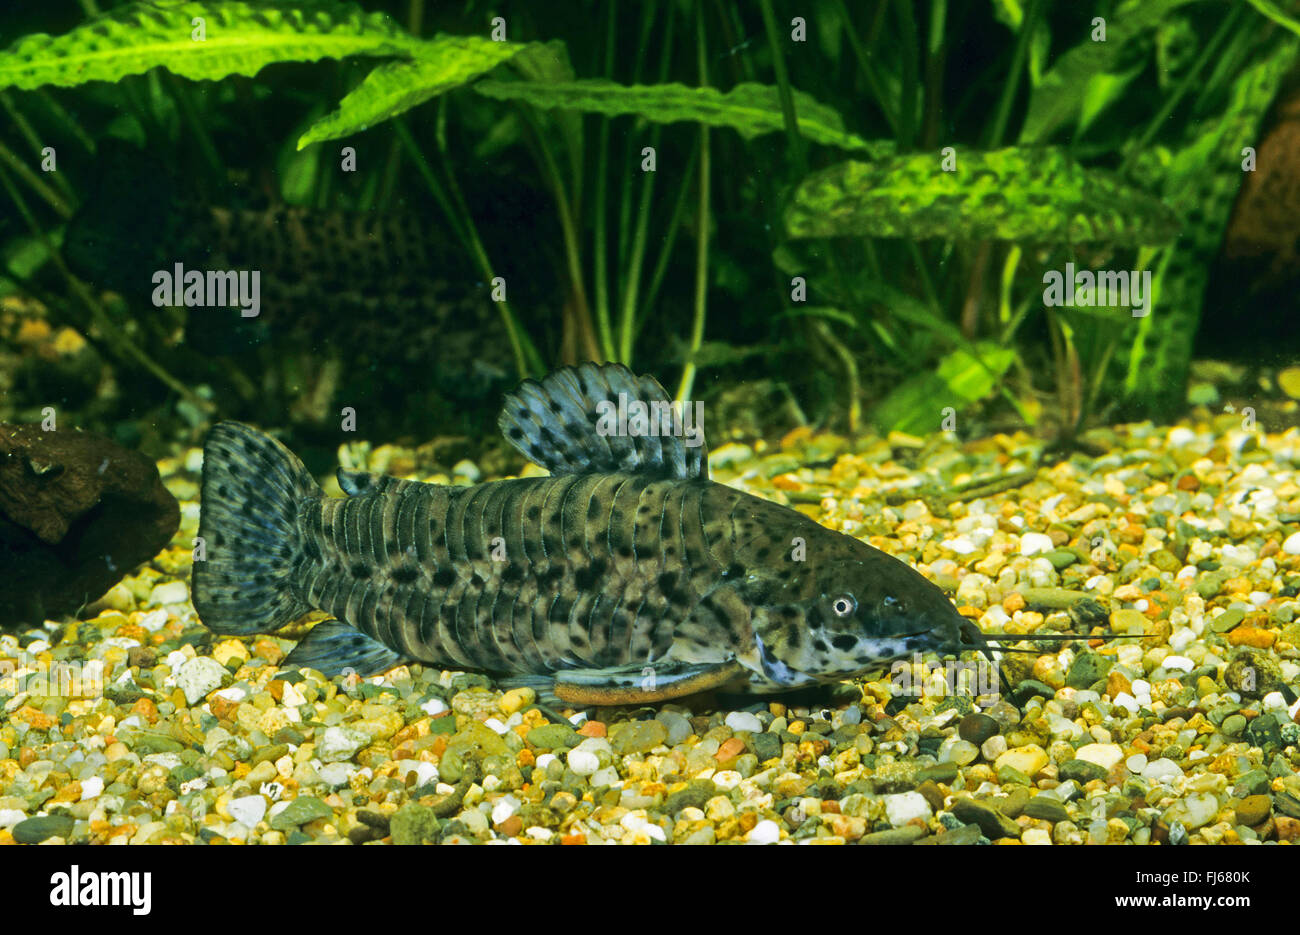 Black Marble Hoplo (Hoplosternum thoracatum, Megalechis thoracata), on the bottom Stock Photo